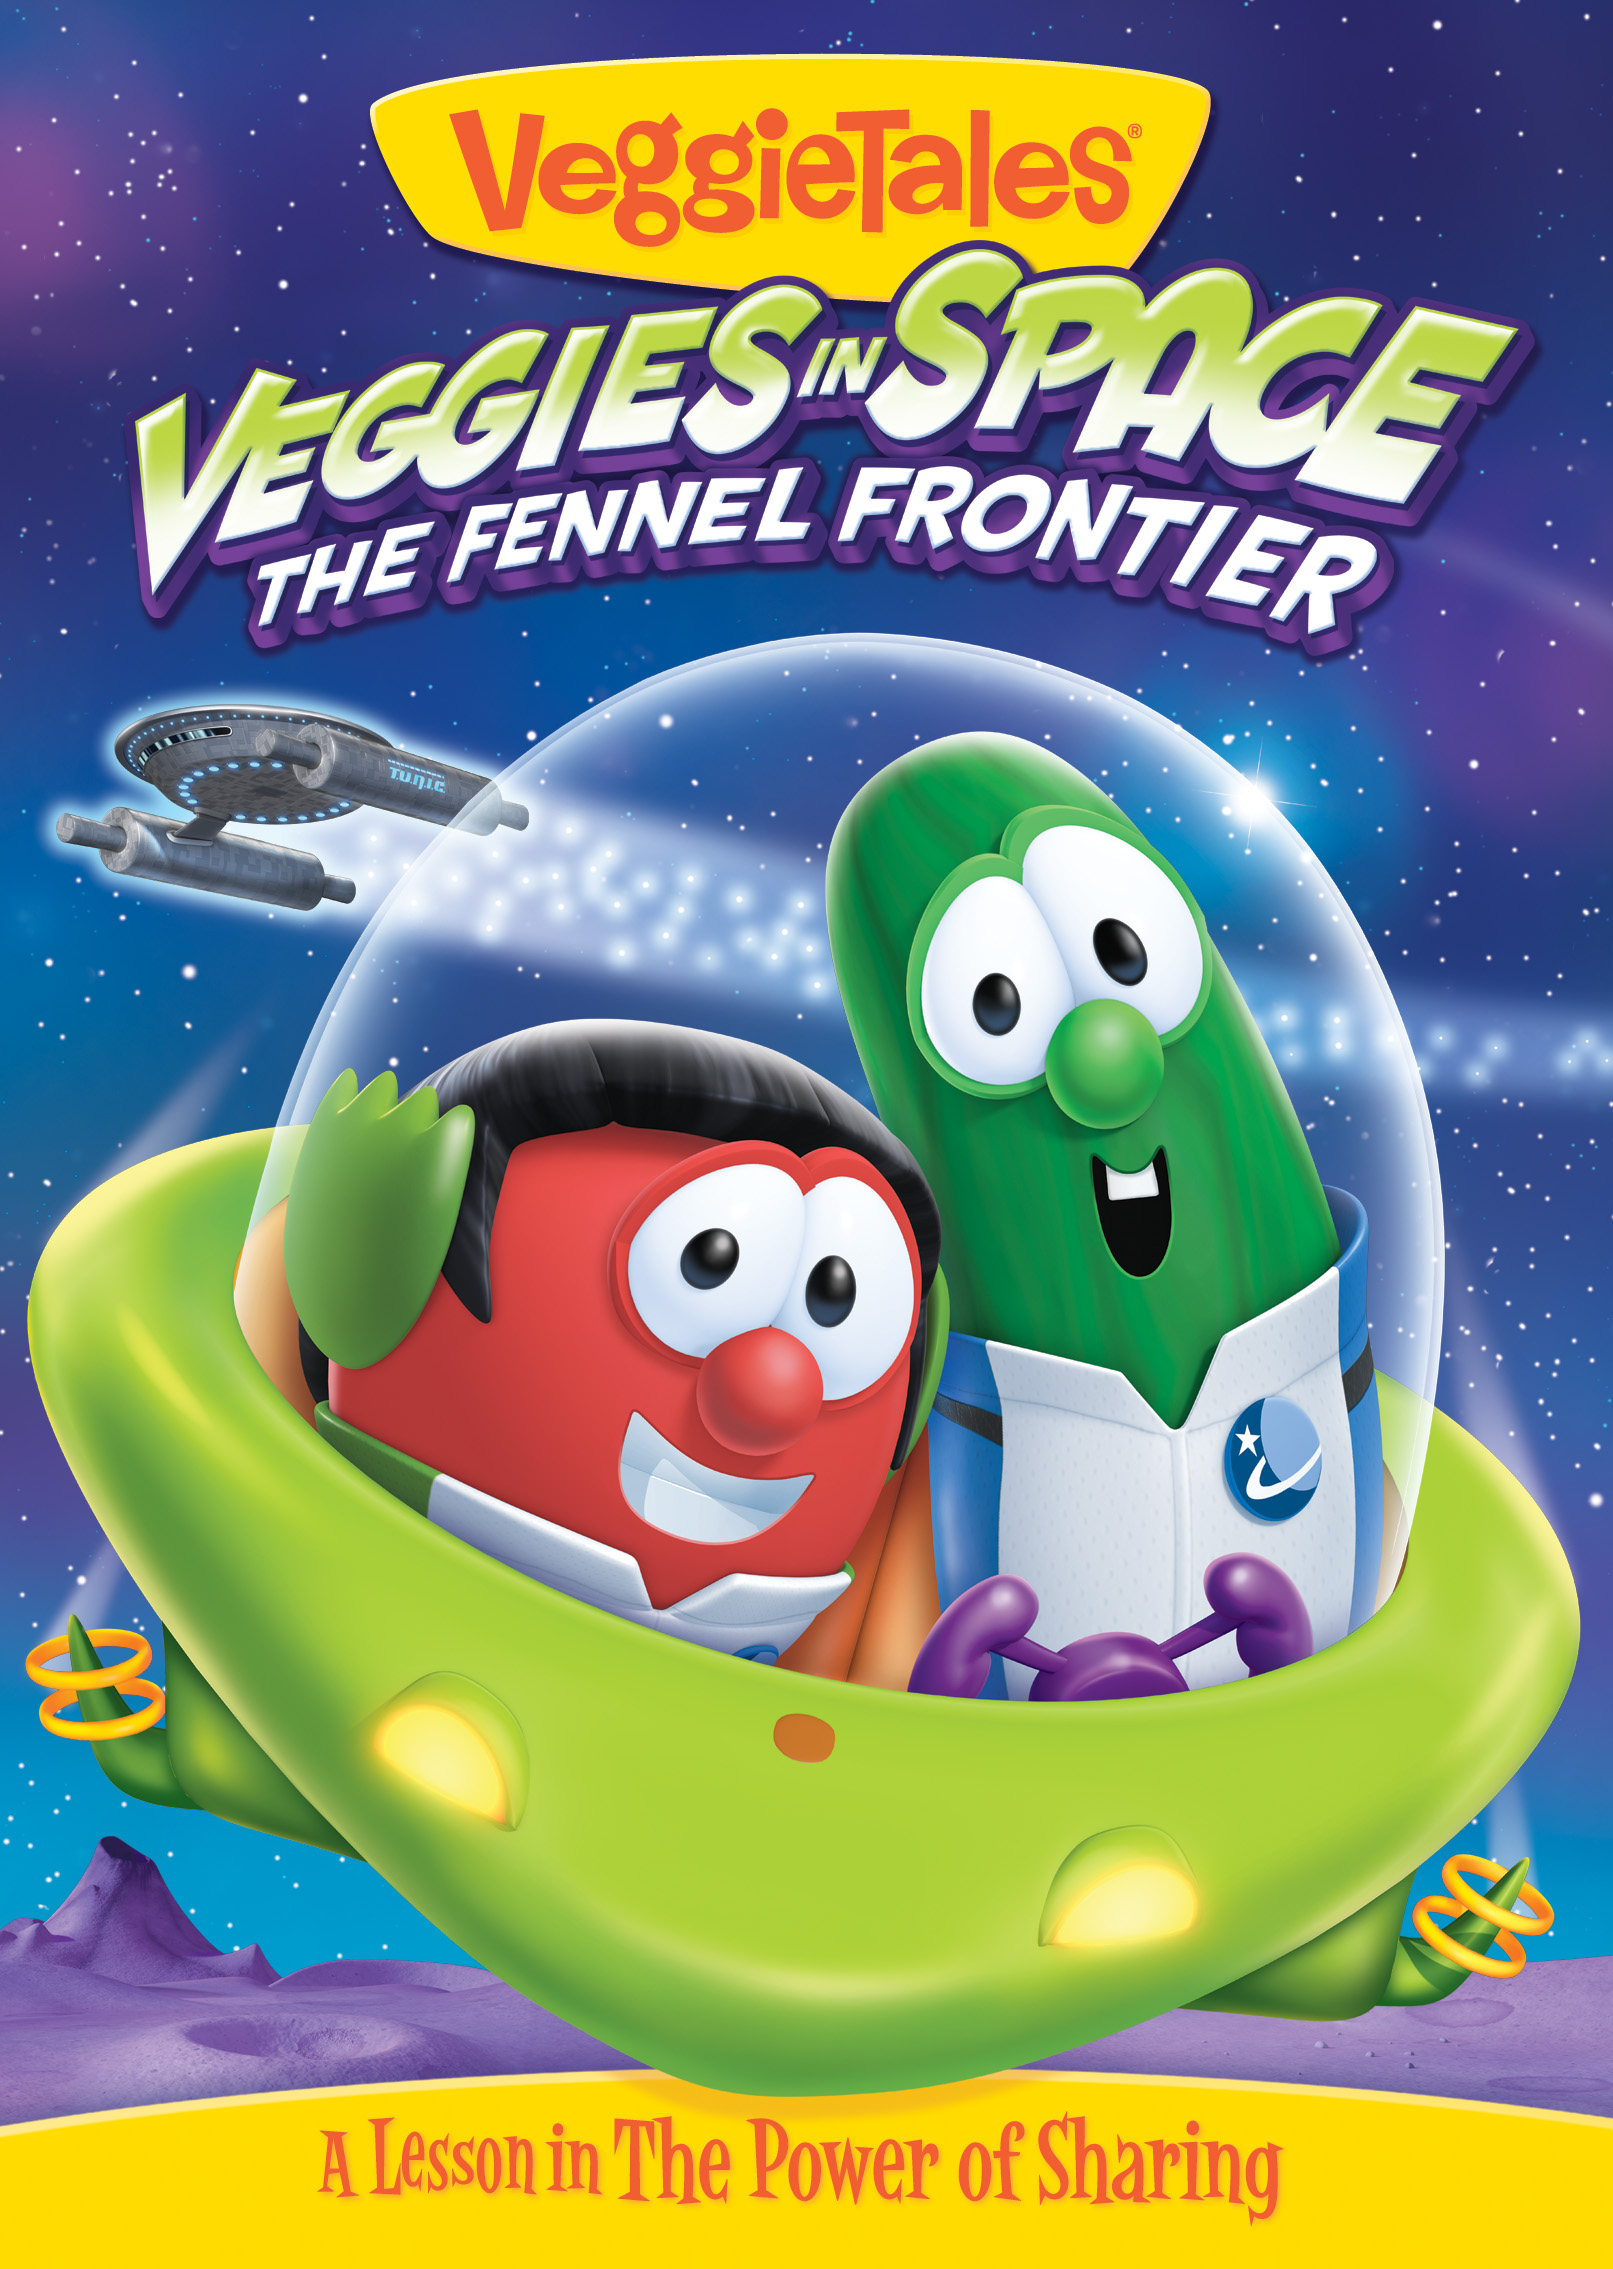 Veggies in Space: A Lesson in the Power of Sharing!